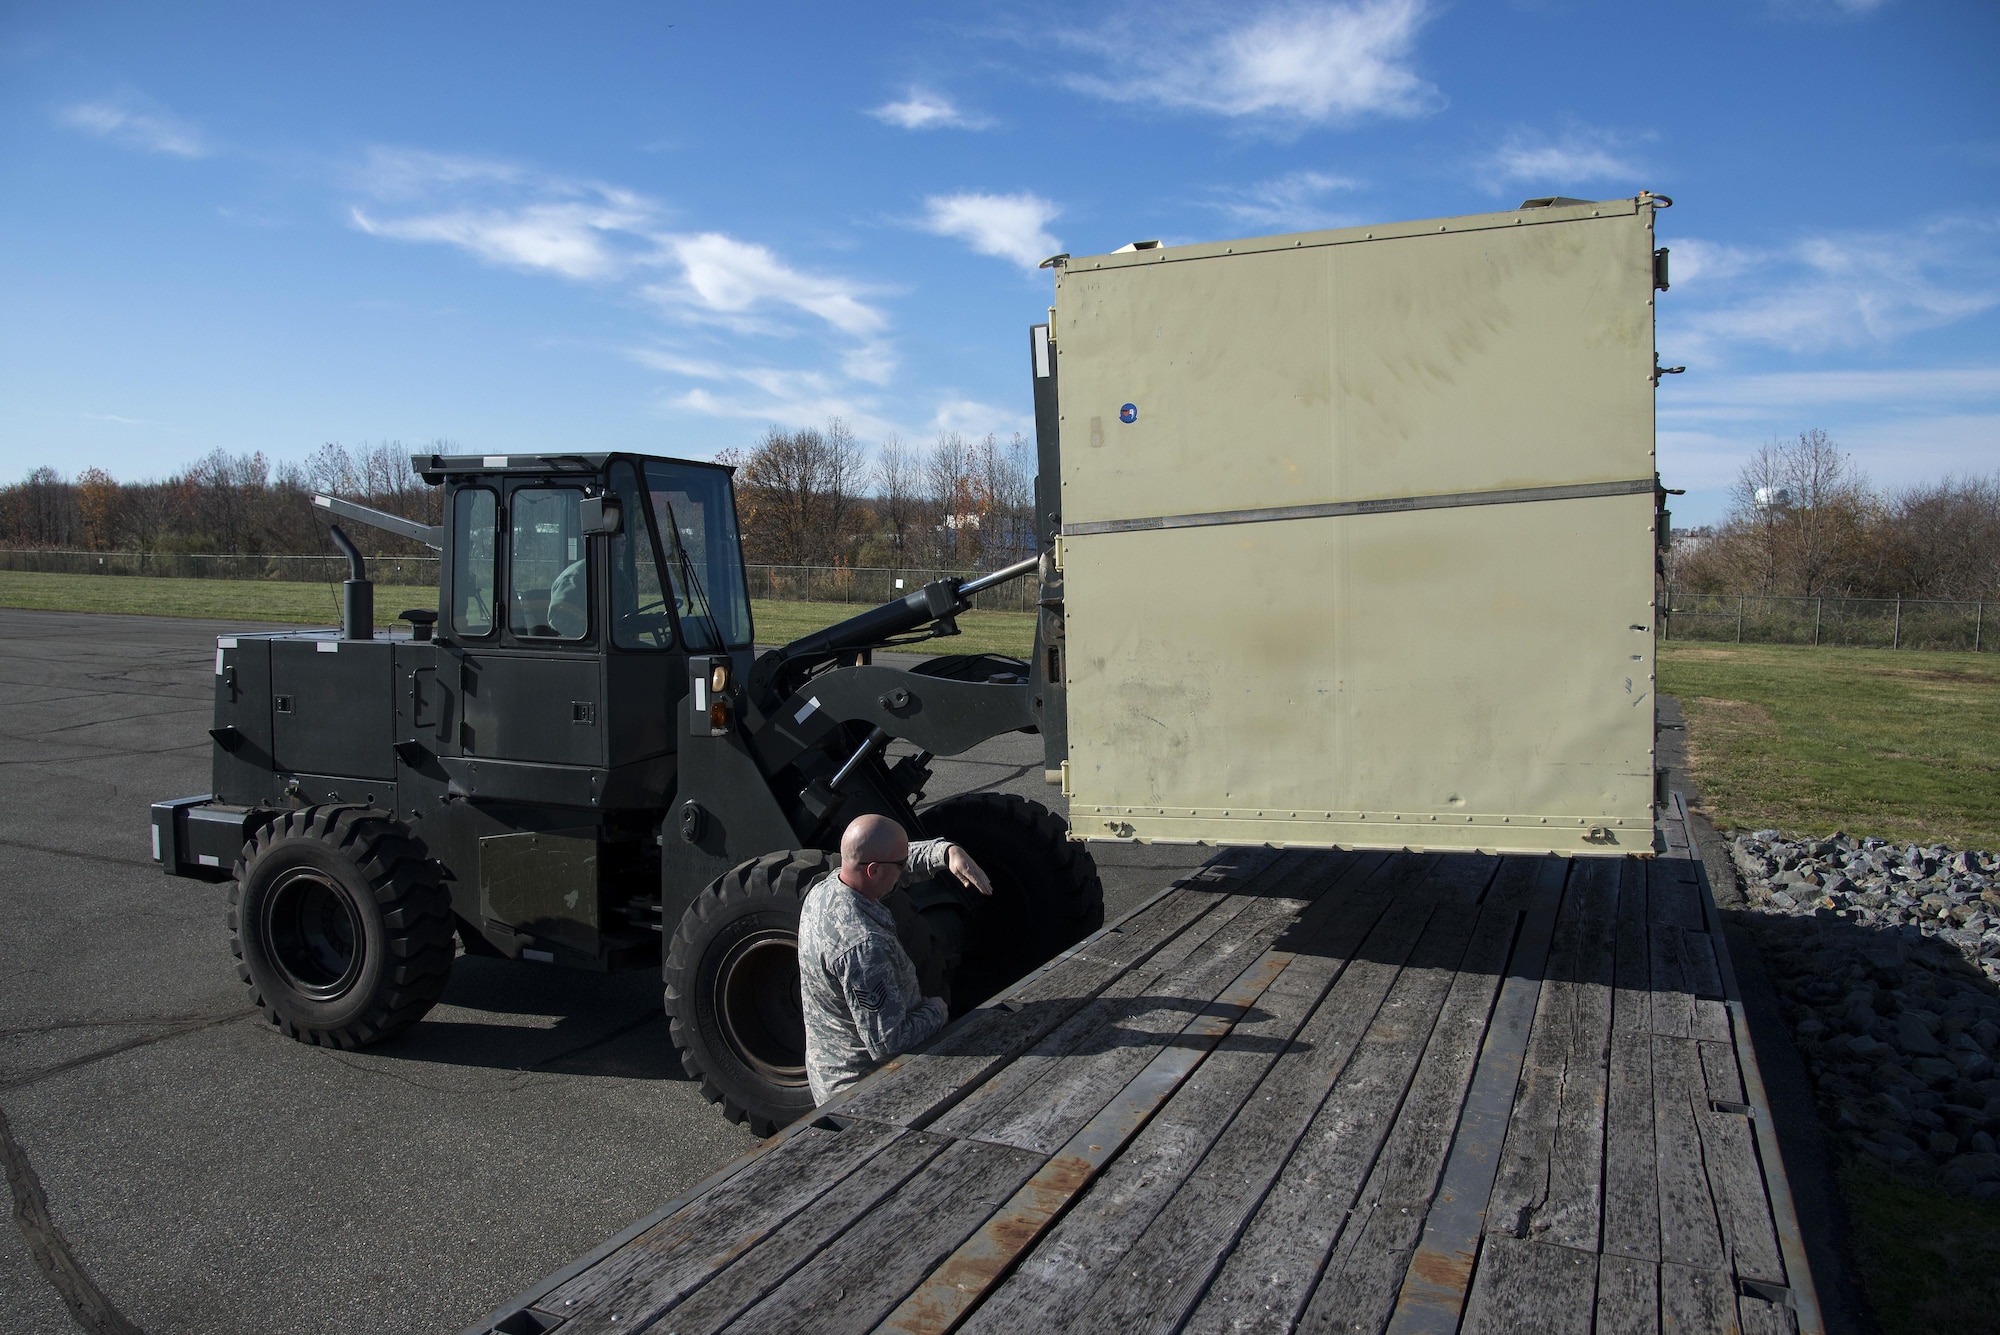 Tech. Sgt. Joshua Casey, 436th Logistics Readiness Squadron NCO in charge of vehicle operations control center support, uses hand signals to direct forklift operations during the ground transportation rodeo Dec. 2, 2016, at Dover Air Force Base, Del. Members of the 436th LRS invited Airmen from the 87th LRS assigned to Joint Base McGuire-Dix-Lakehurst, N.J., to compete in the first event of its kind, from which coordinators intended to improve morale, showcase precision vehicle operation and improve training through friendly competition. (U.S. Air Force photo by Senior Airman Aaron J. Jenne)